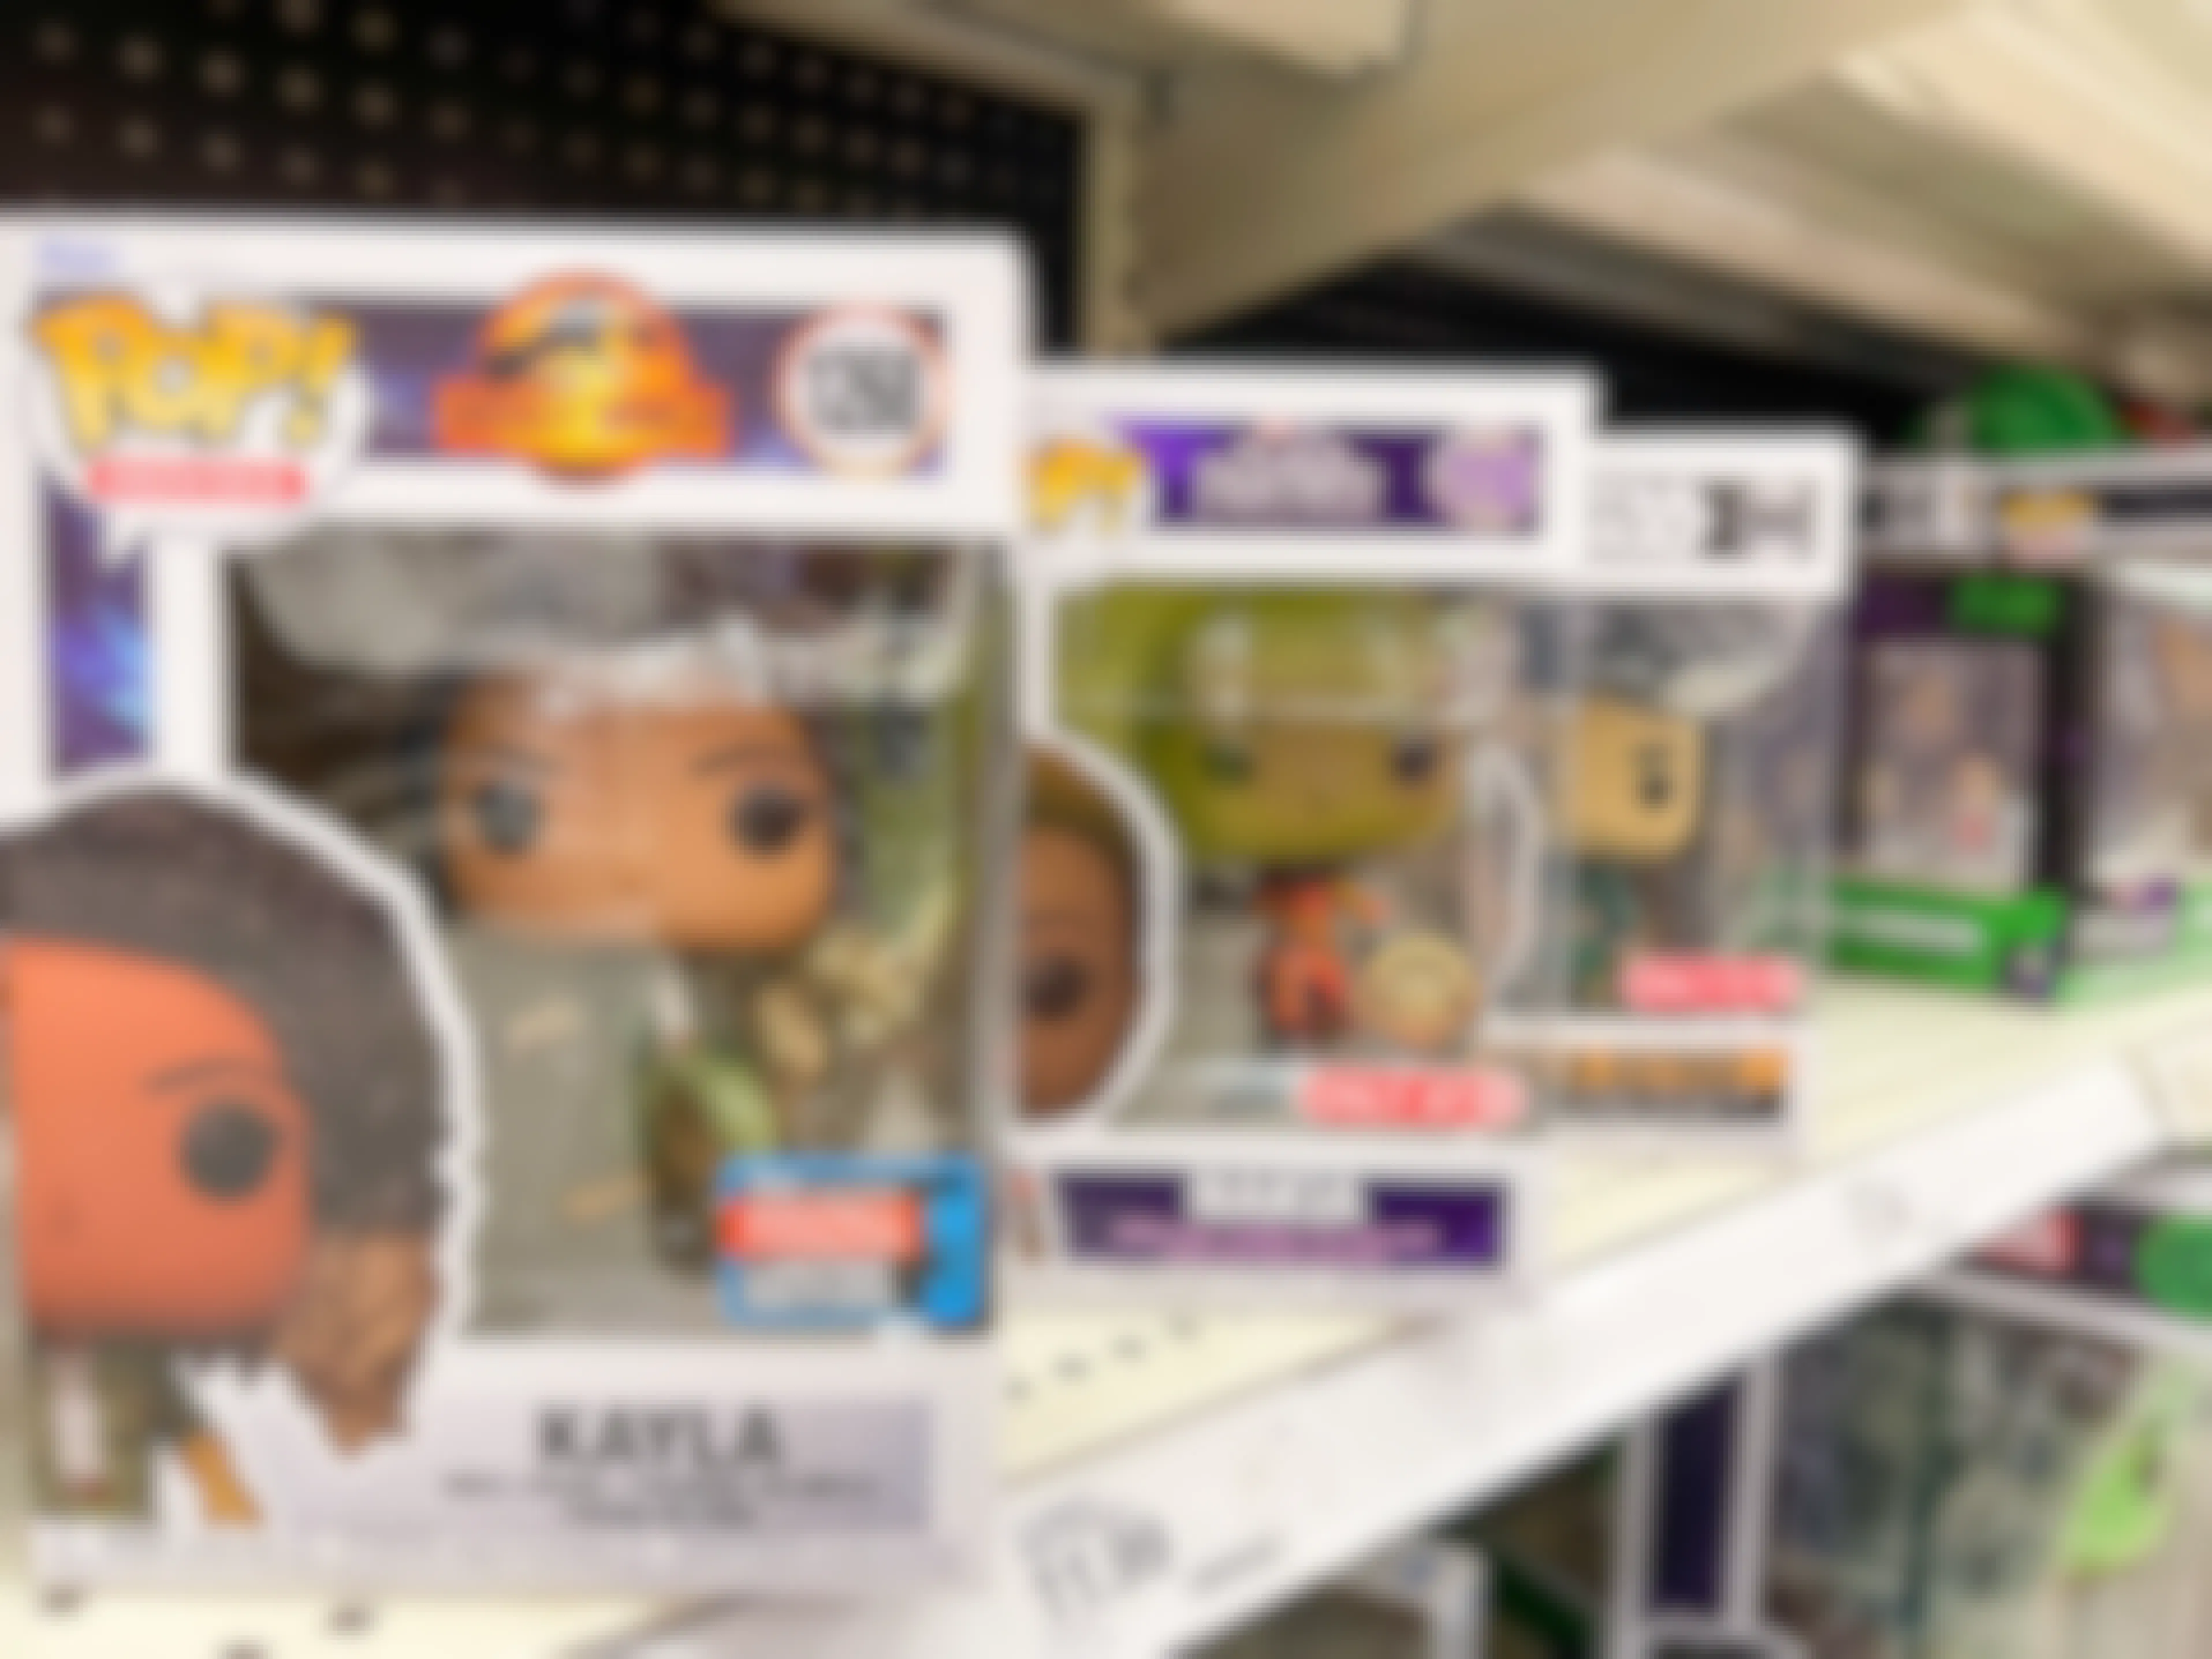 A variety of Funko Pop toys sitting on a store shelf.